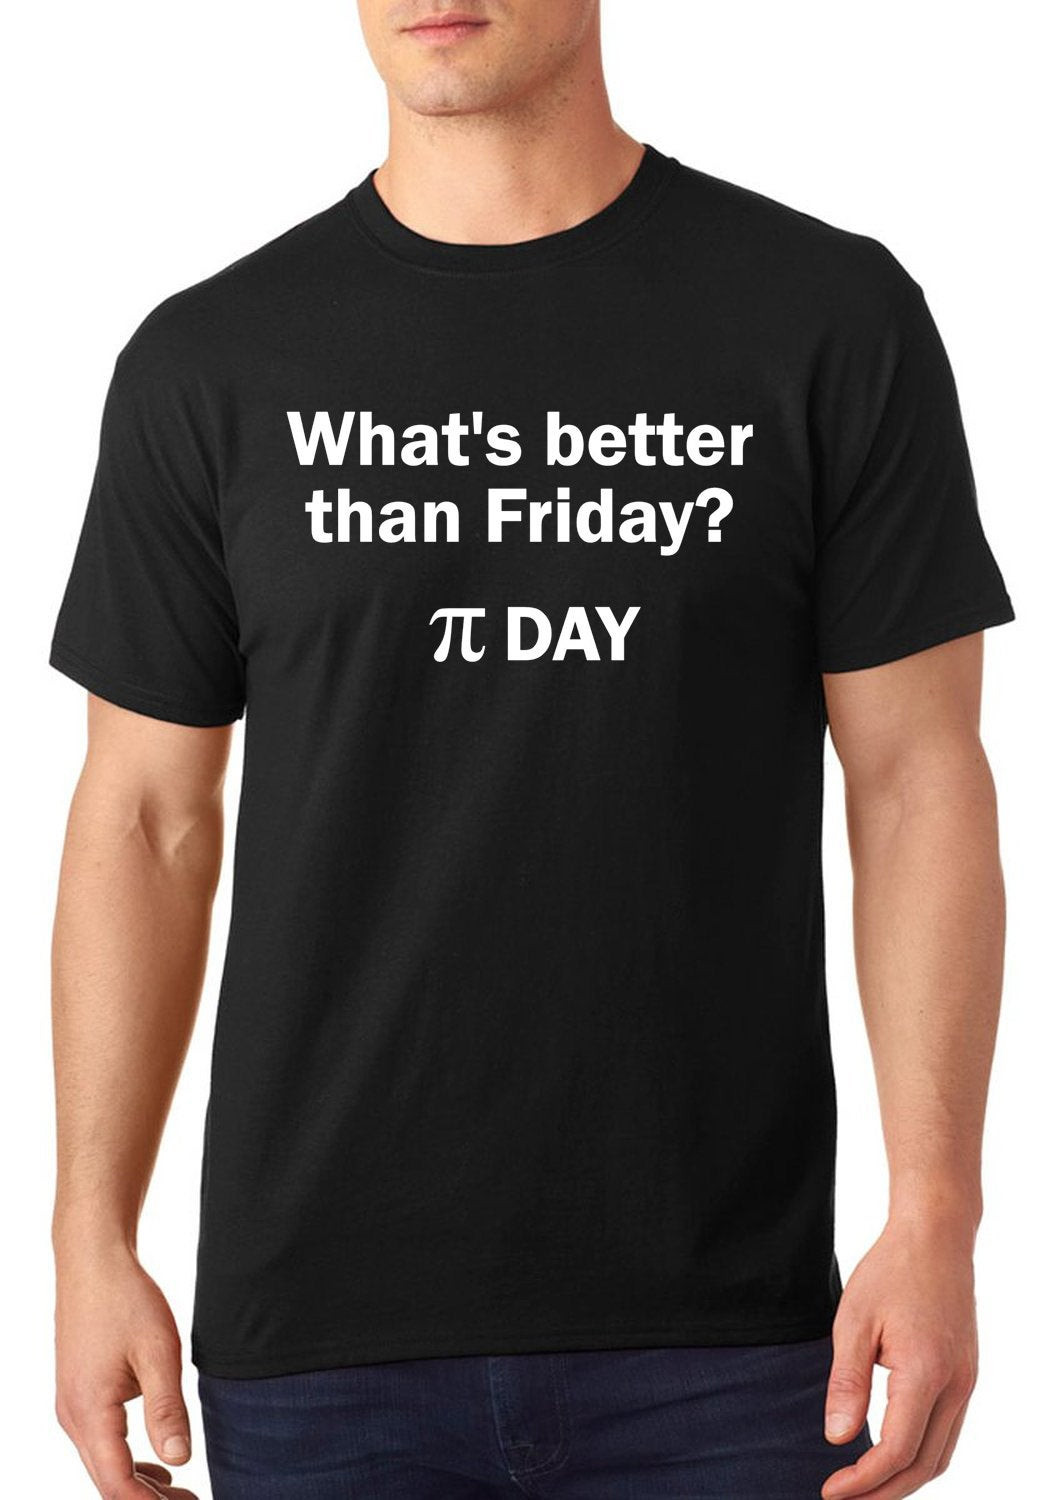 Pi Day T Shirts Ideas
 What s better than Friday Pi Day t shirt pi t shirt pi